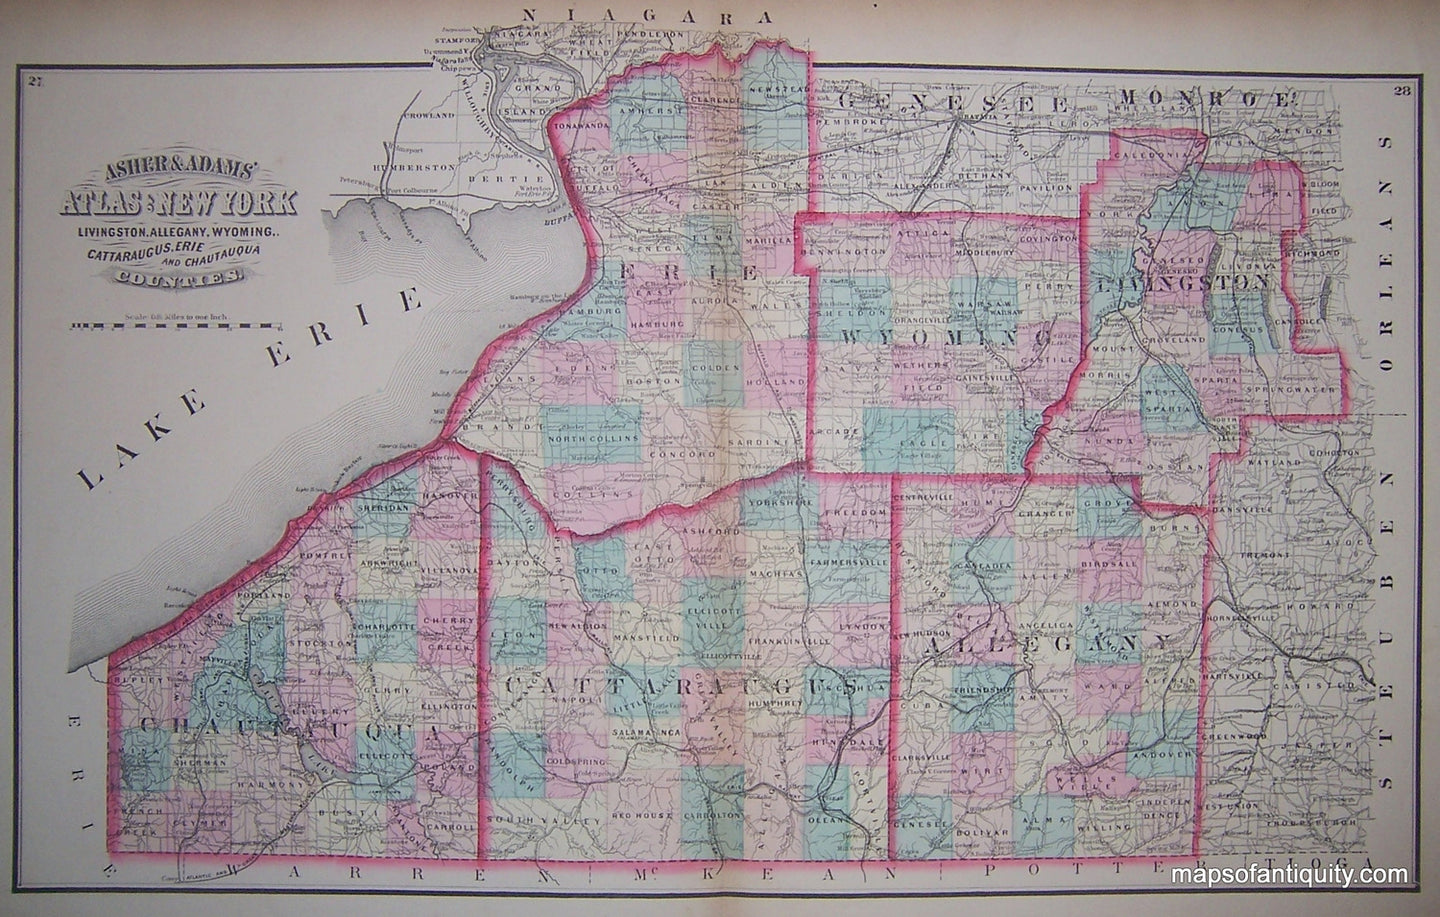 Hand-colored-Antique-Map-Livingston-Allegany-Wyoming-Cattaraugus-Erie-and-Chautauqua-Counties-(NY)-United-States-New-York-1871-Asher-and-Adams-Maps-Of-Antiquity